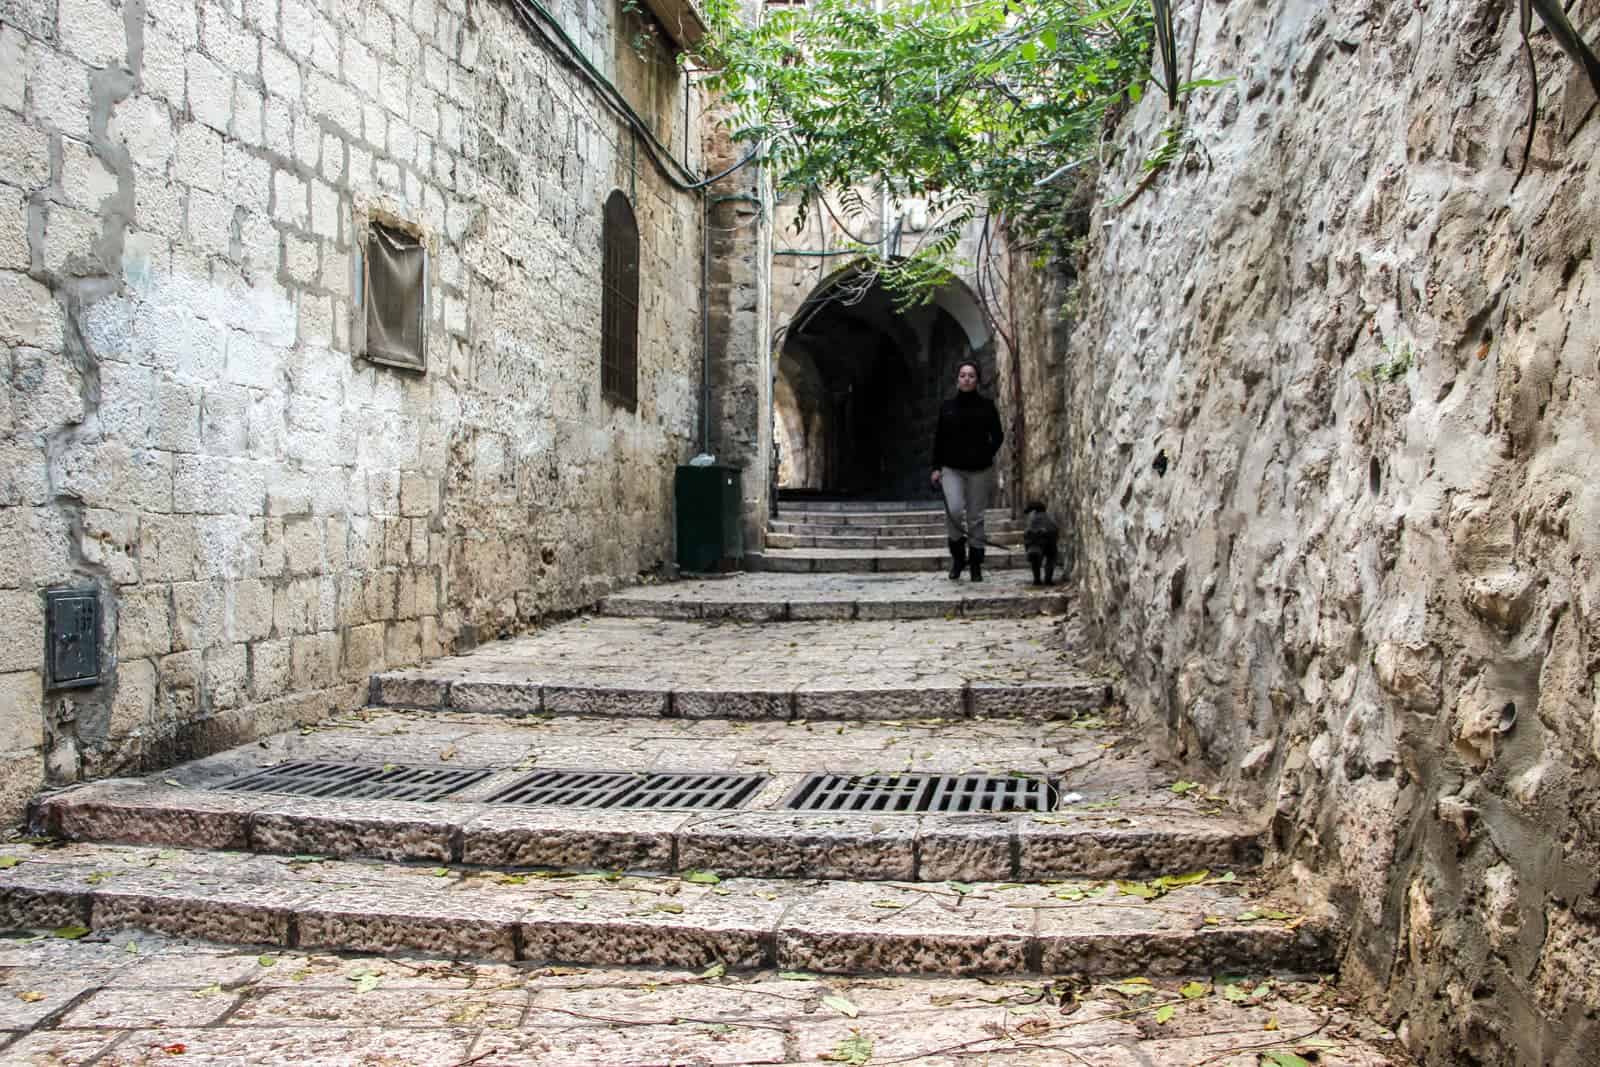 A woman in dark clothing walks down wide stone steps with her dog, in a stone-walled alleyway in Jerusalem Old City in Israel. 